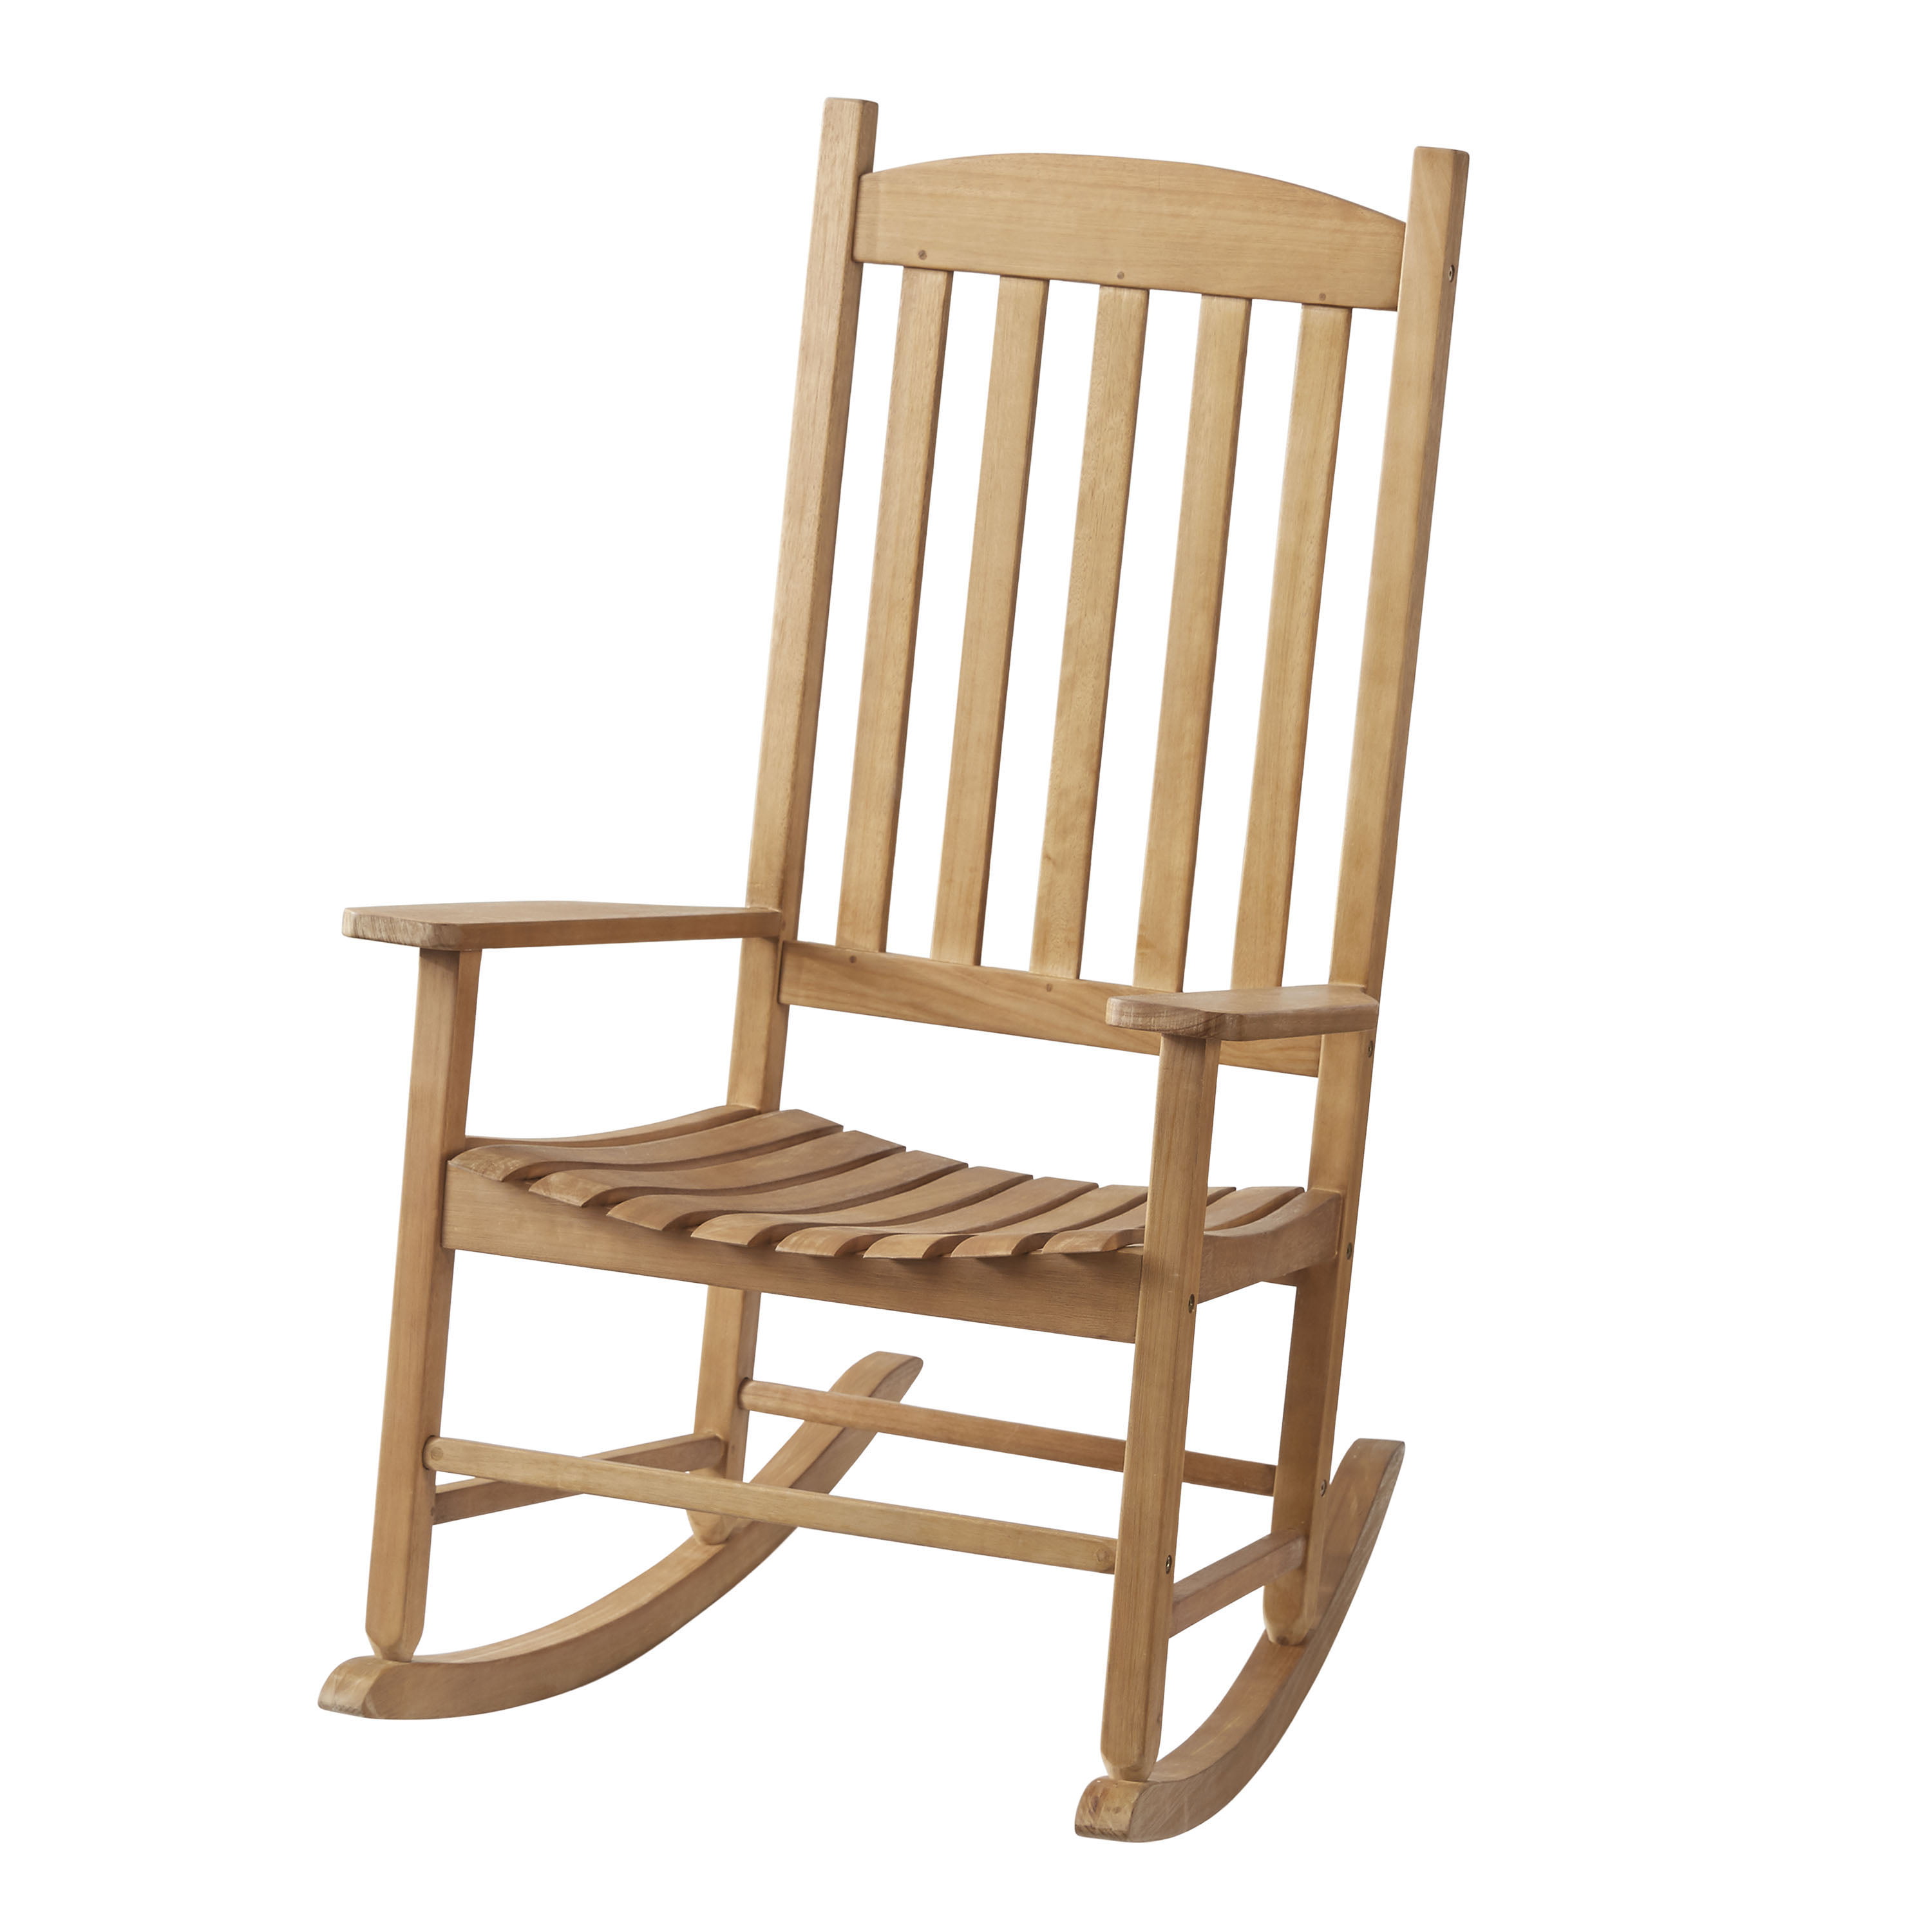 Outdoor Wooden Rocking Chairs Near Me - bbruschithepuggle